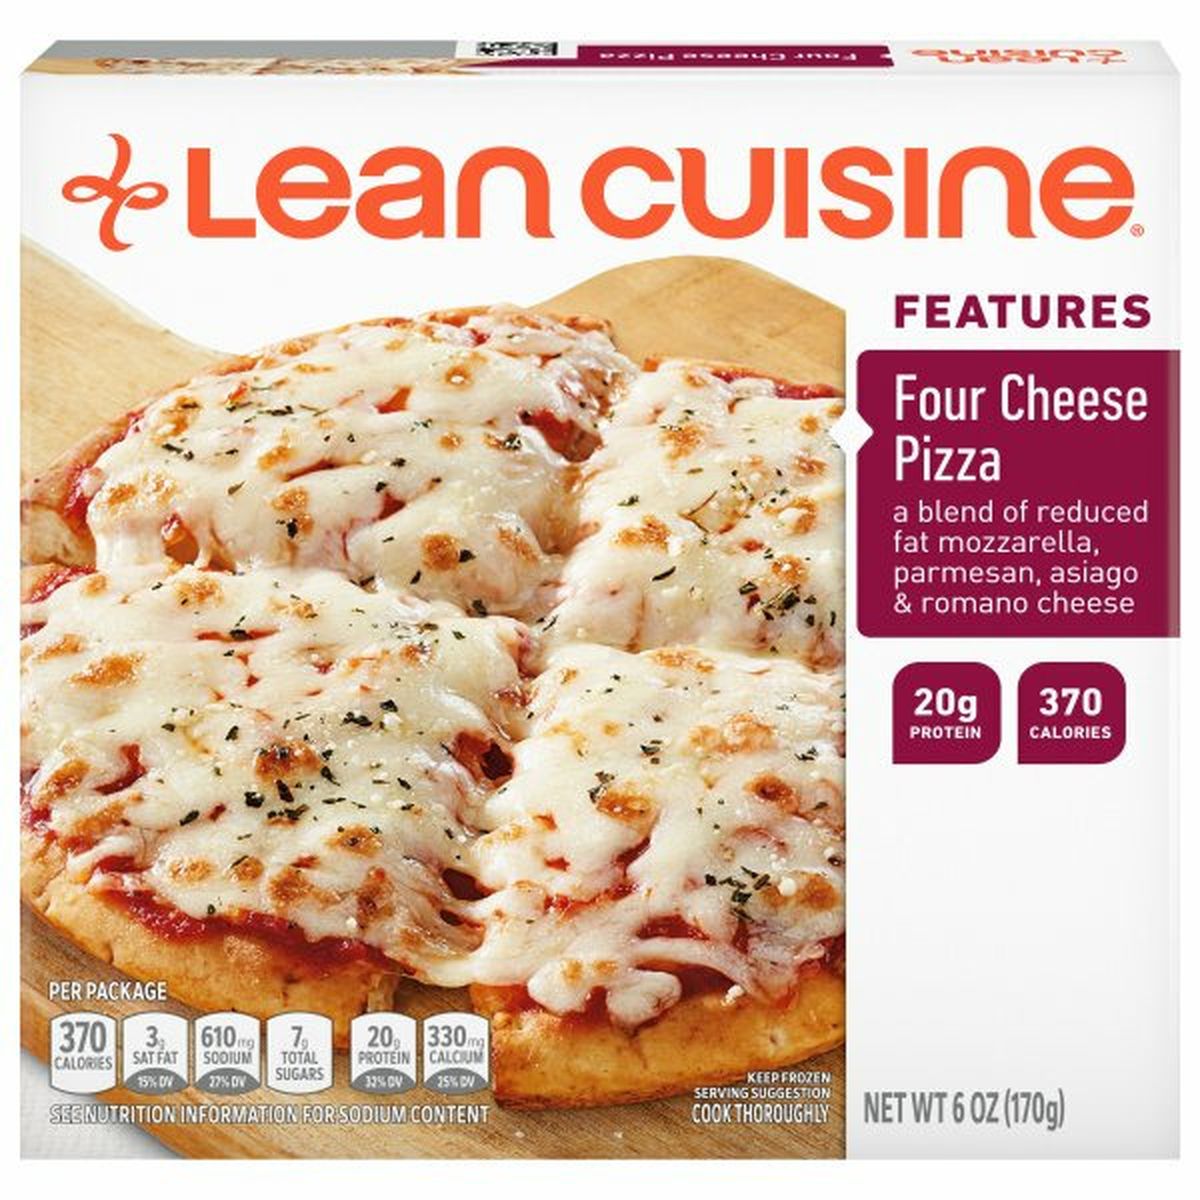 Calories in Lean Cuisine Pizza, Four Cheese, Features